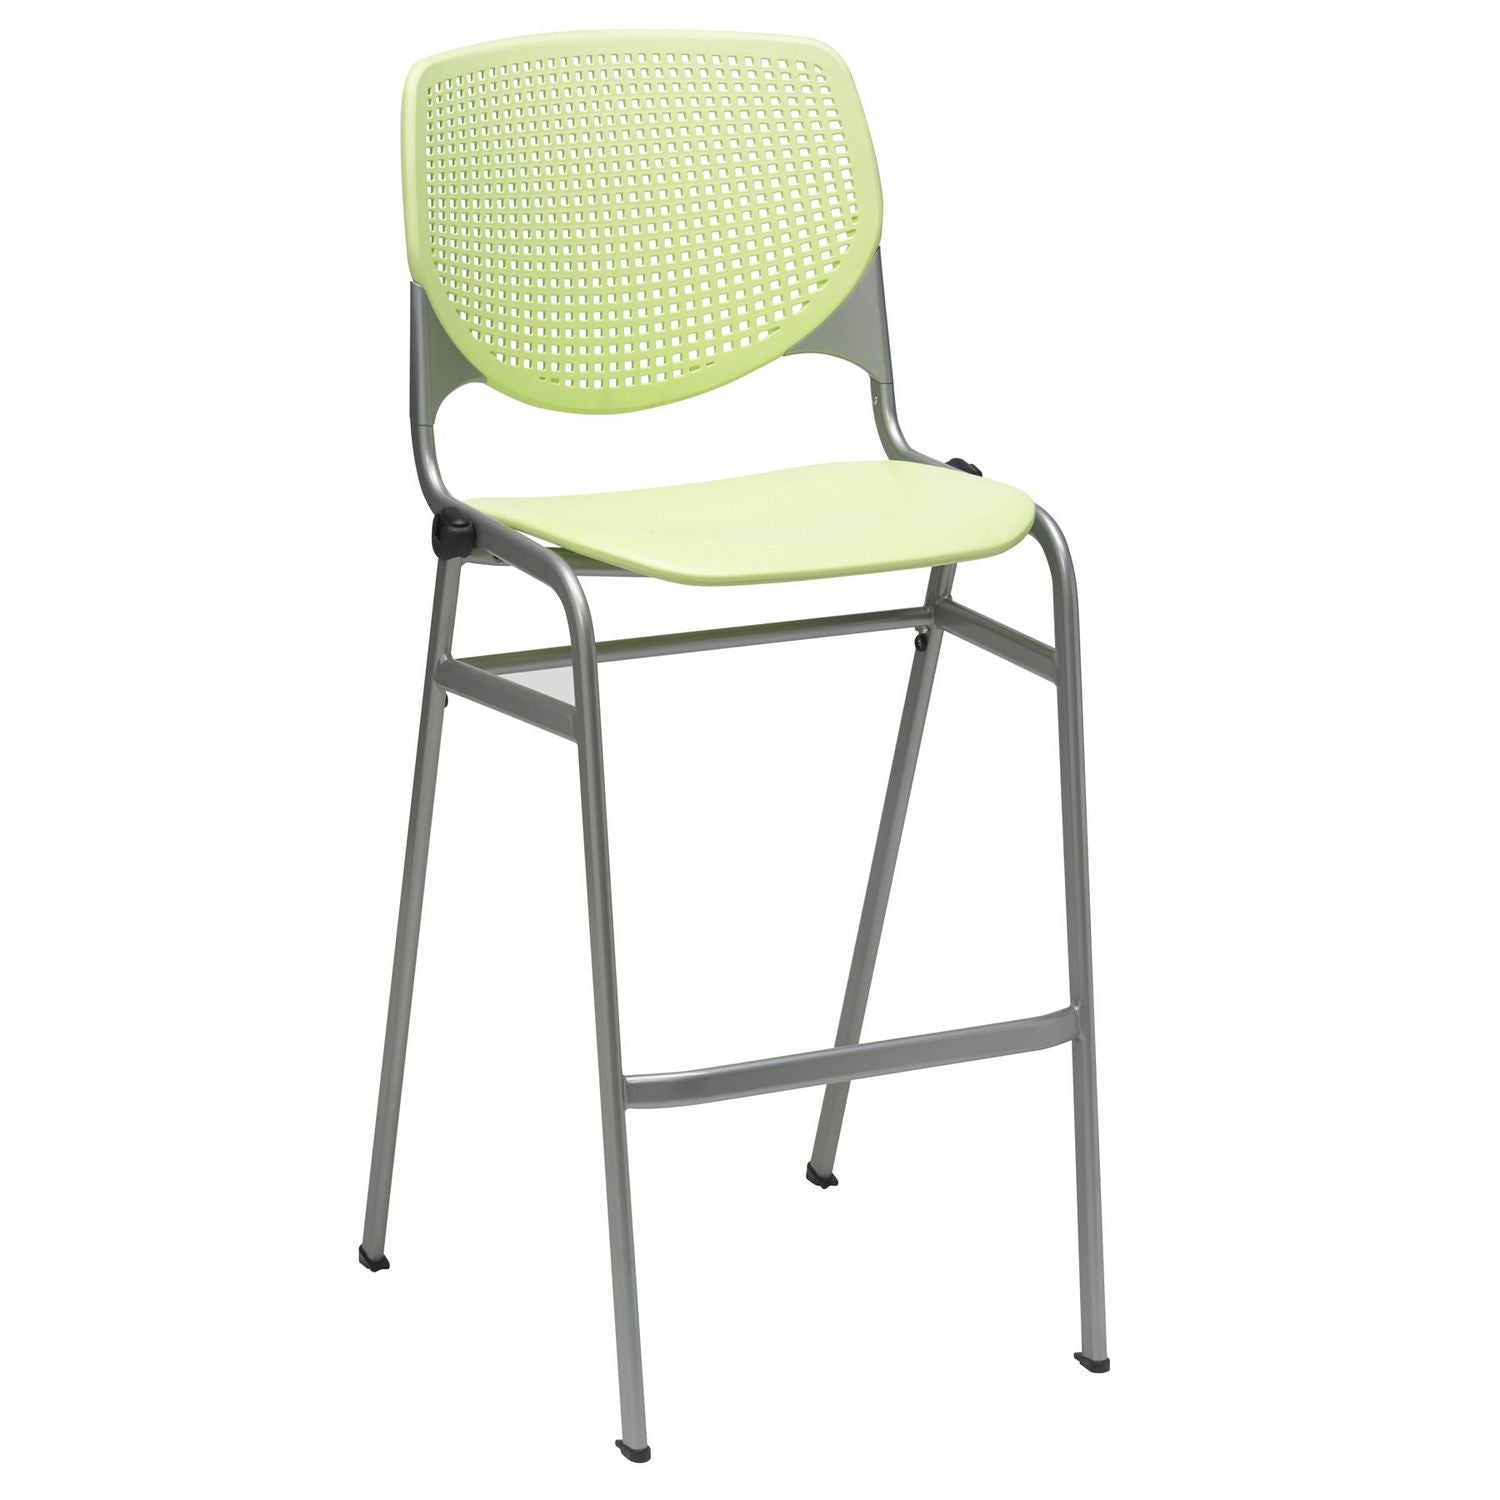 pedestal-bistro-table-with-four-lime-green-kool-series-barstools-round-36-dia-x-41h-designer-white-ships-in-4-6-bus-days_kfi811774037112 - 4